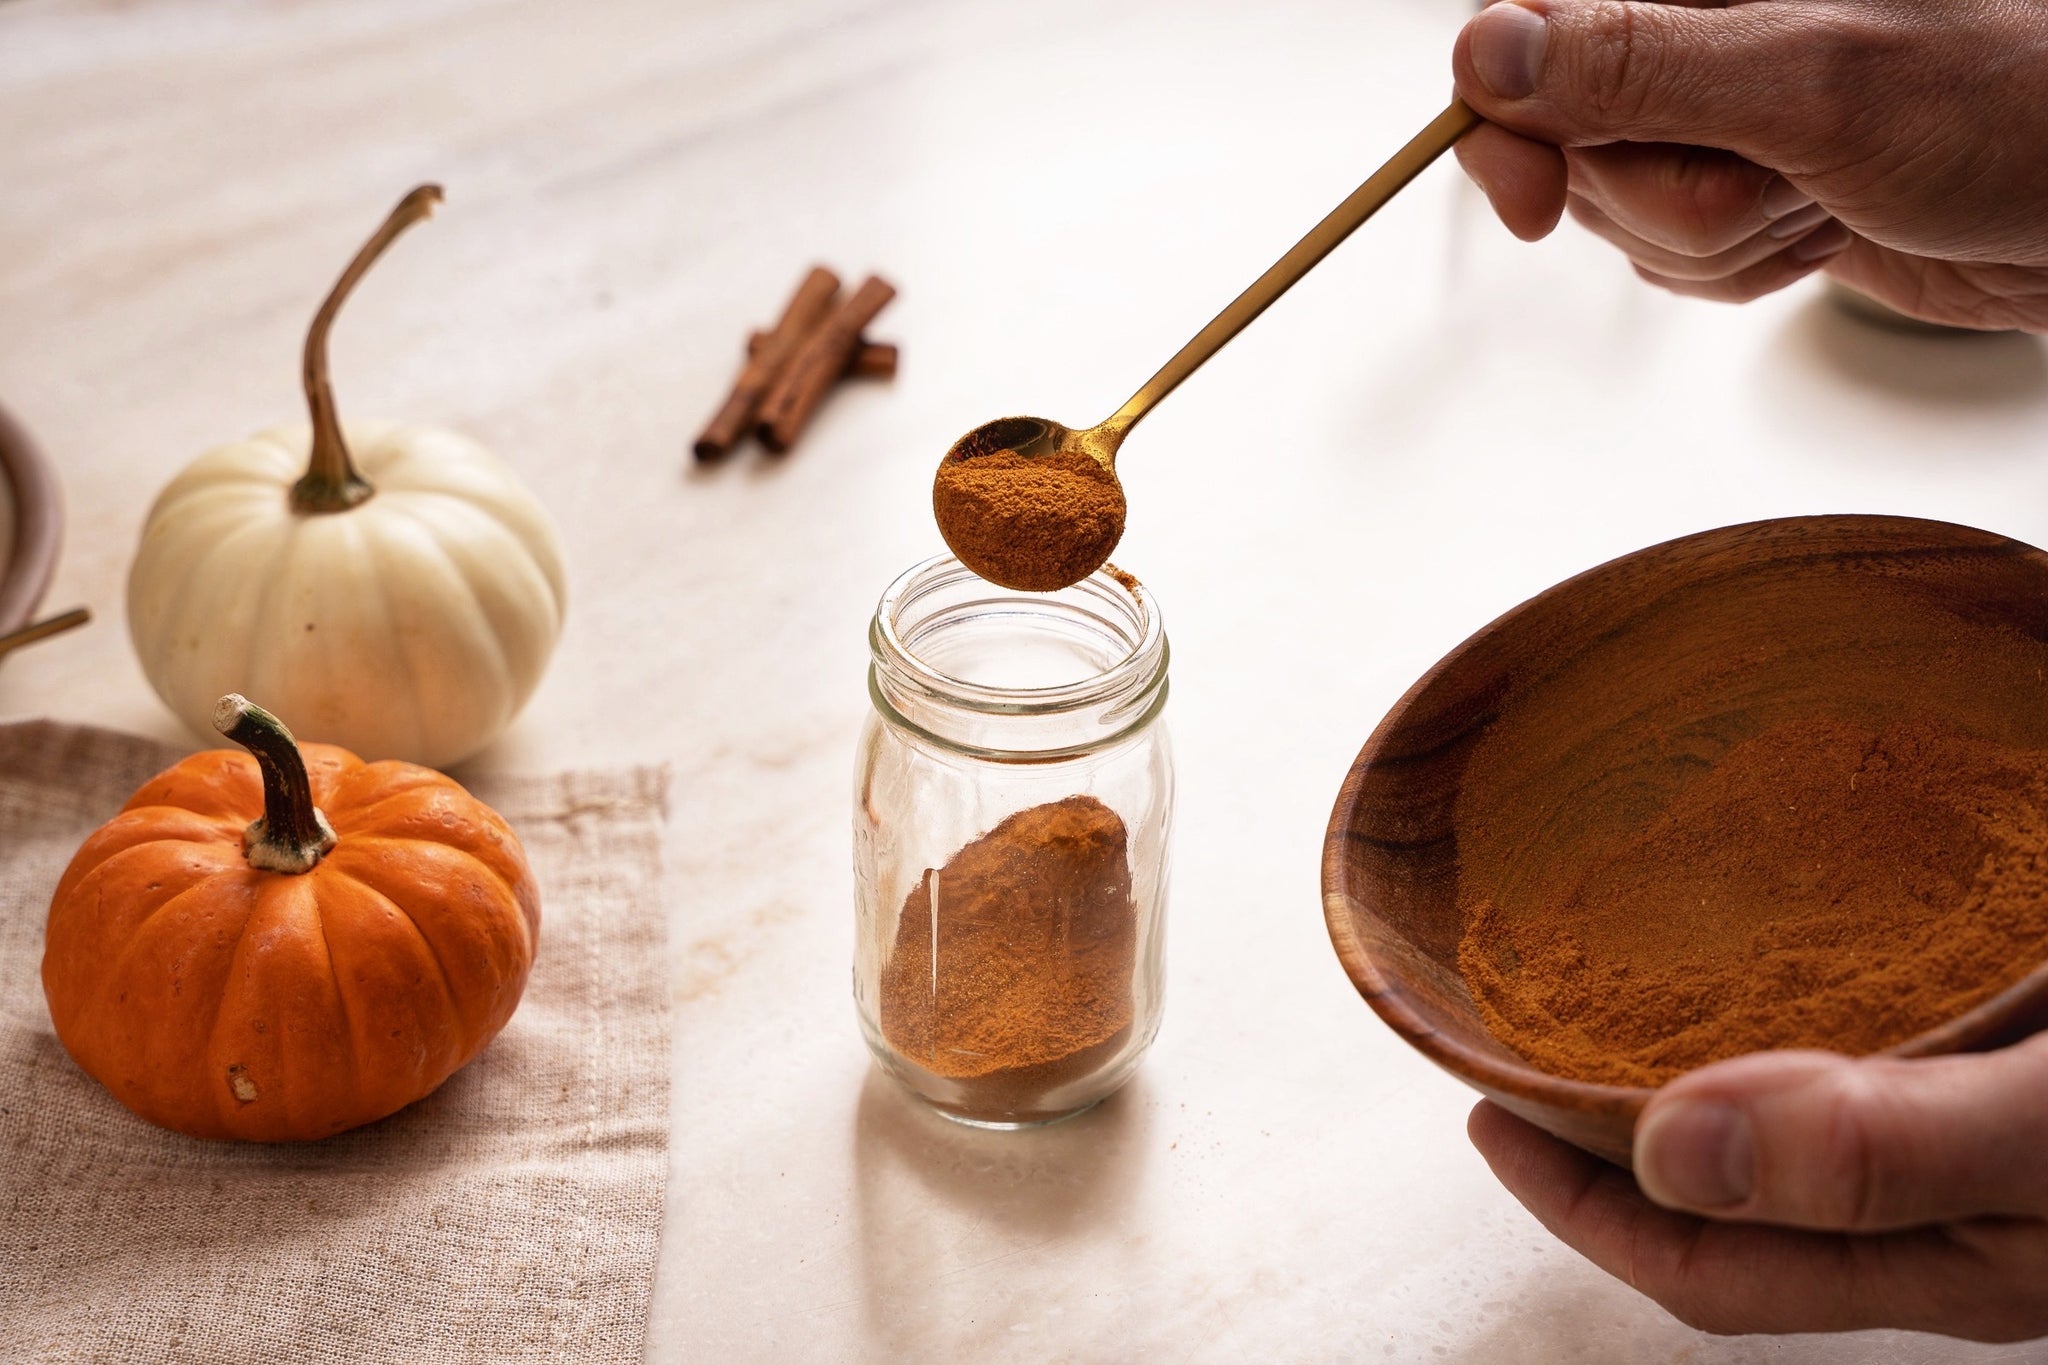 woman's hand using a small brass spoon to transfer pumpkin spice powder from wooden bowl to a spice jar